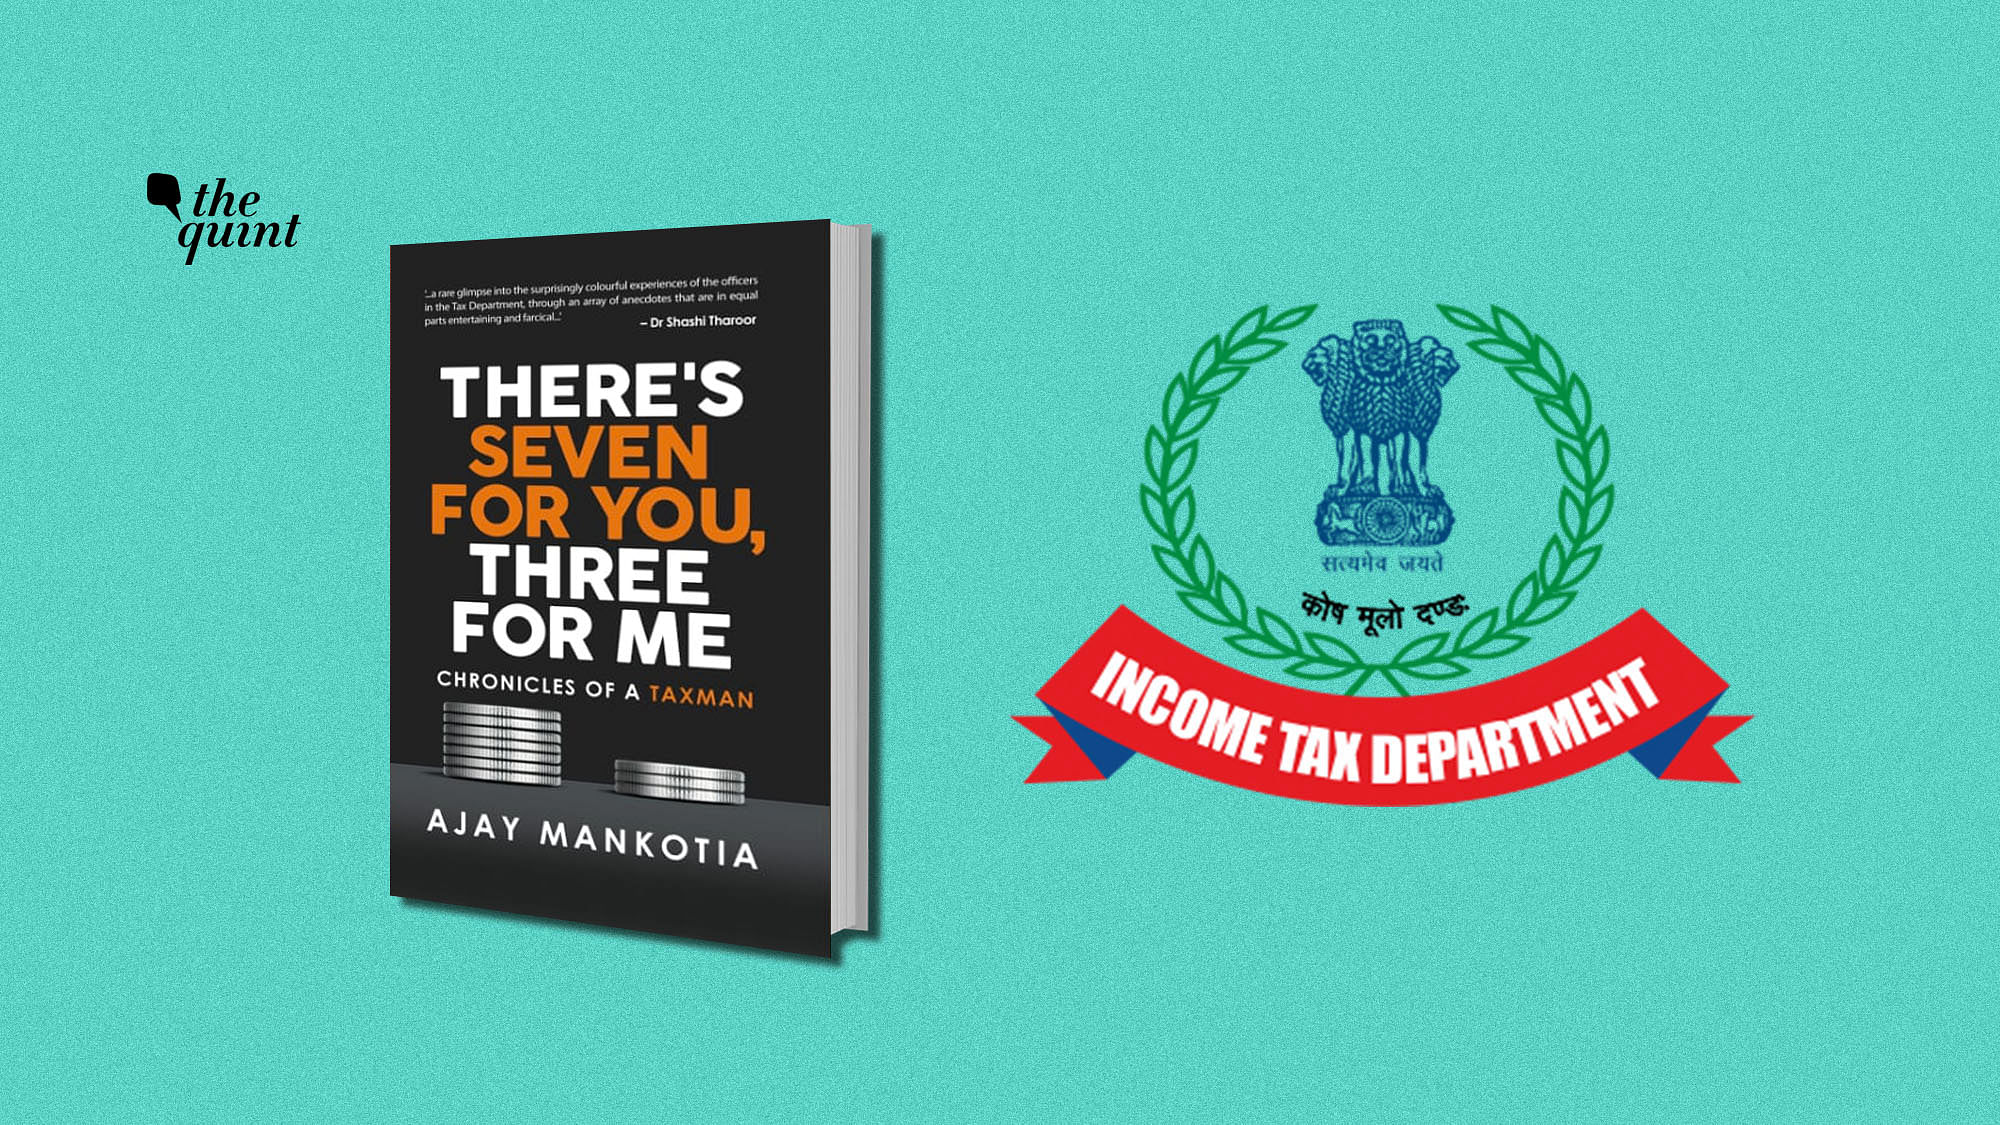 Image of former taxman Ajay Mankotia’s new book’s cover used for representational purposes.